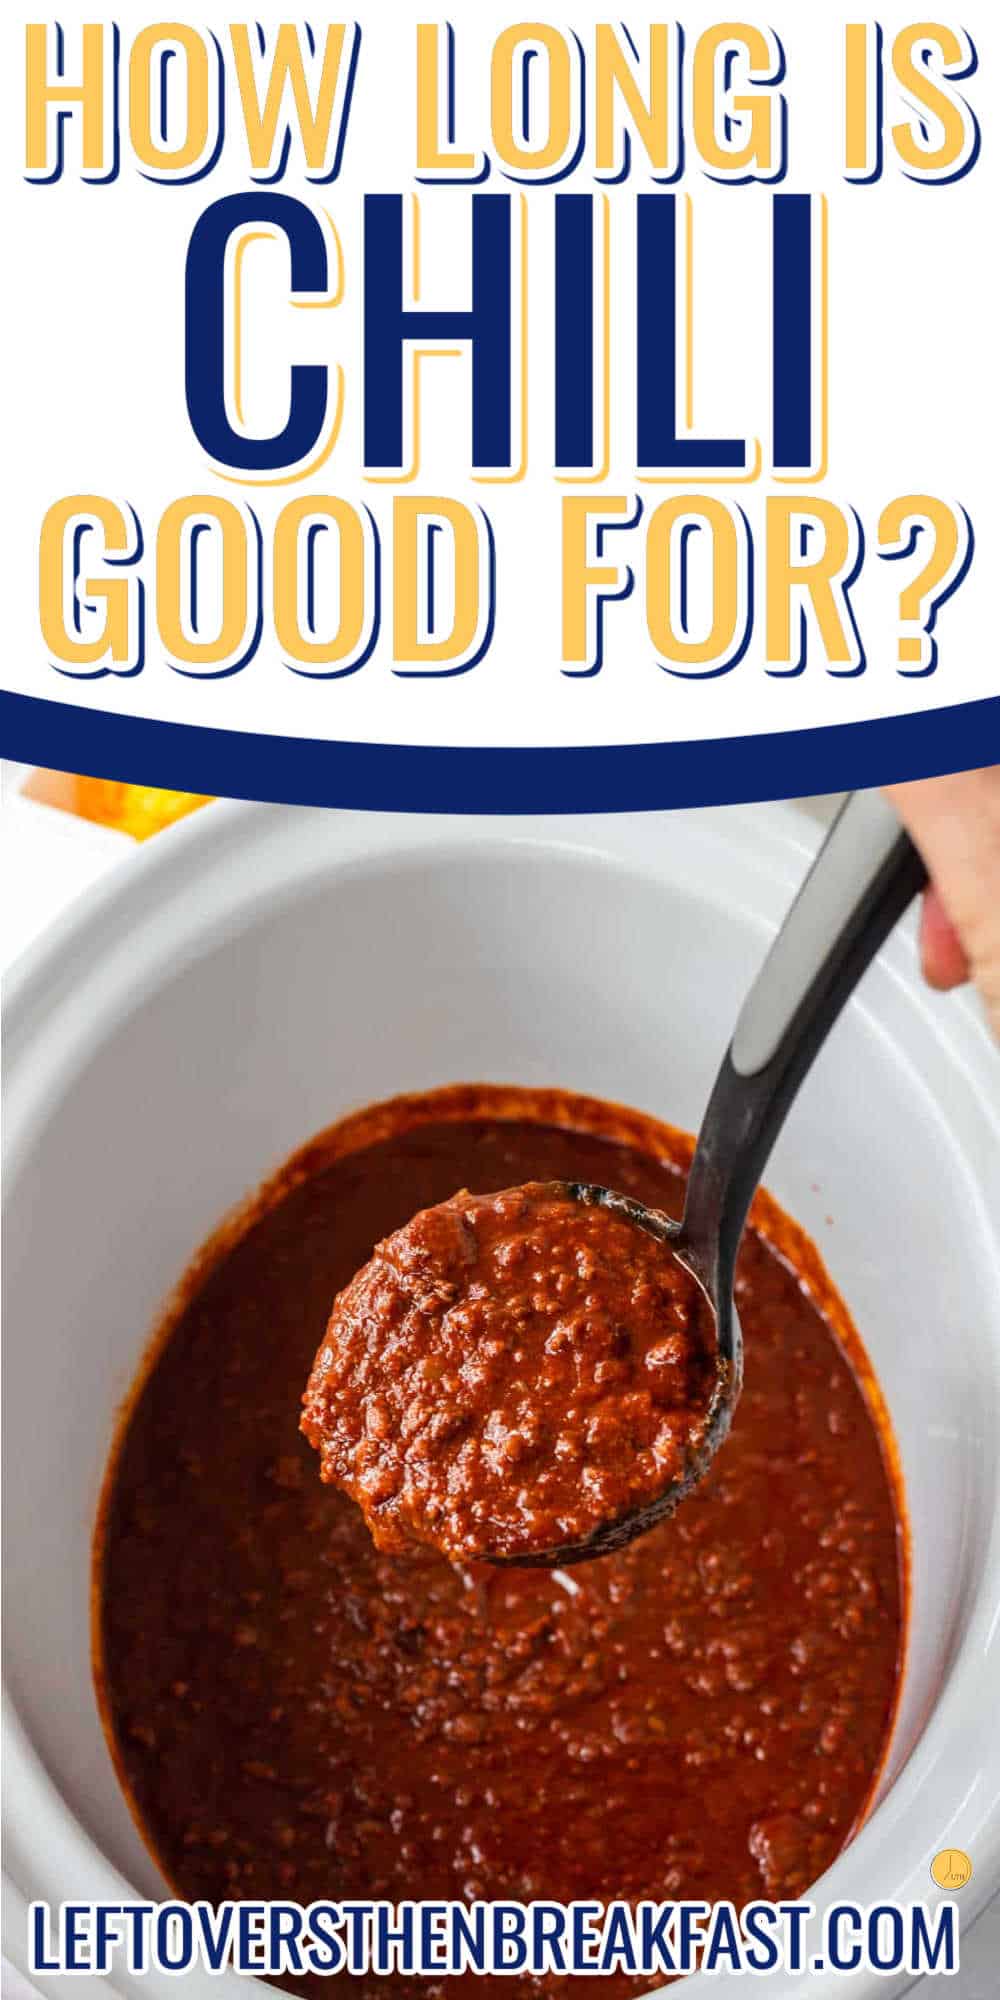 ladle of chili with white banner and text "how long is chili good for?"